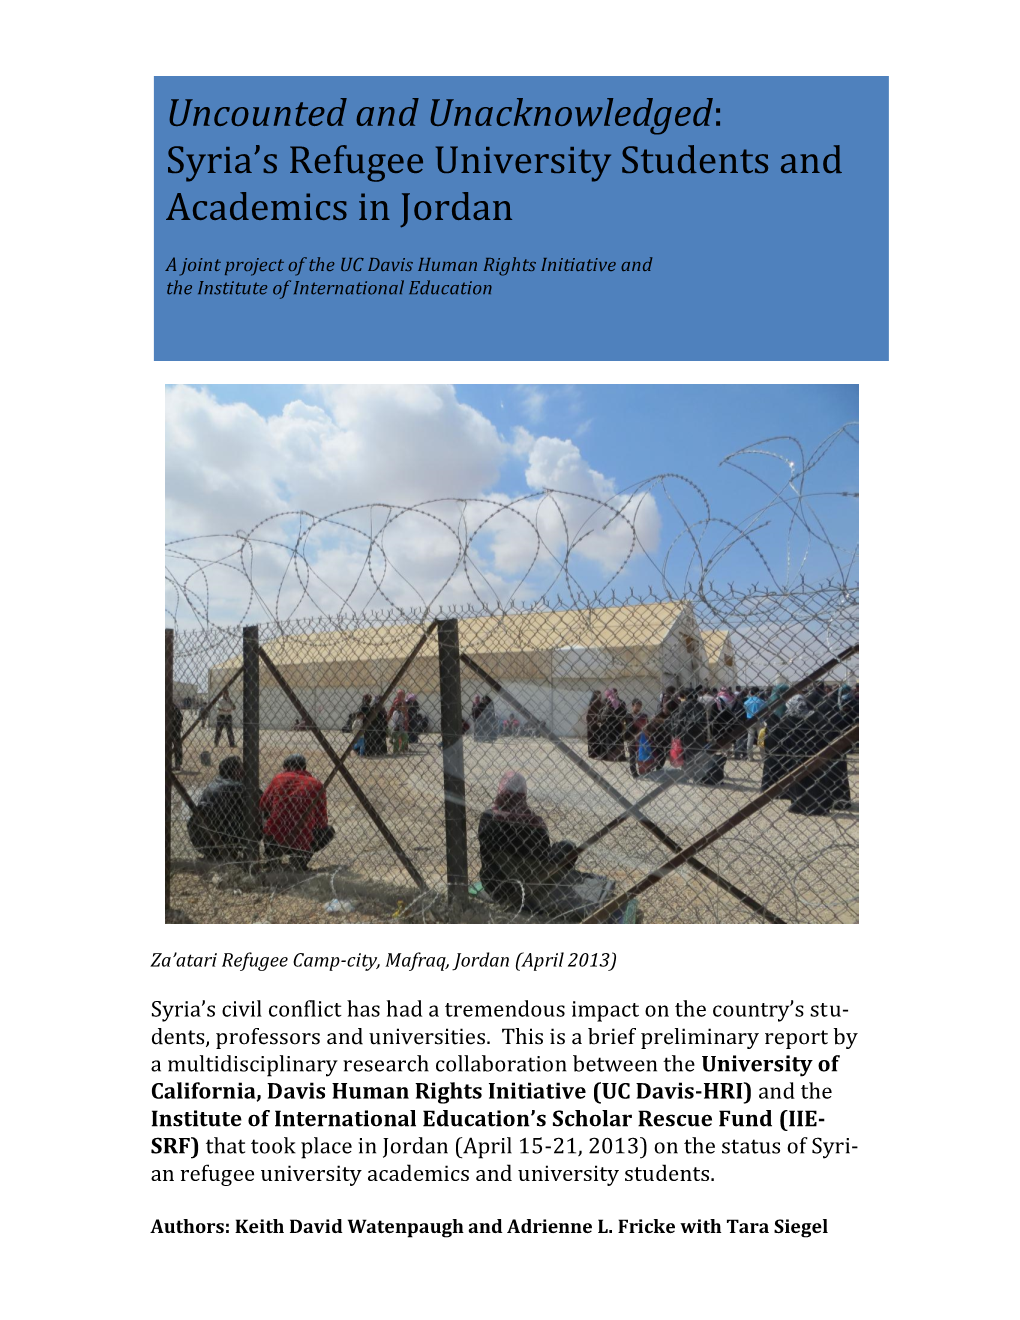 Syria's Refugee University Students and Academics in Jordan